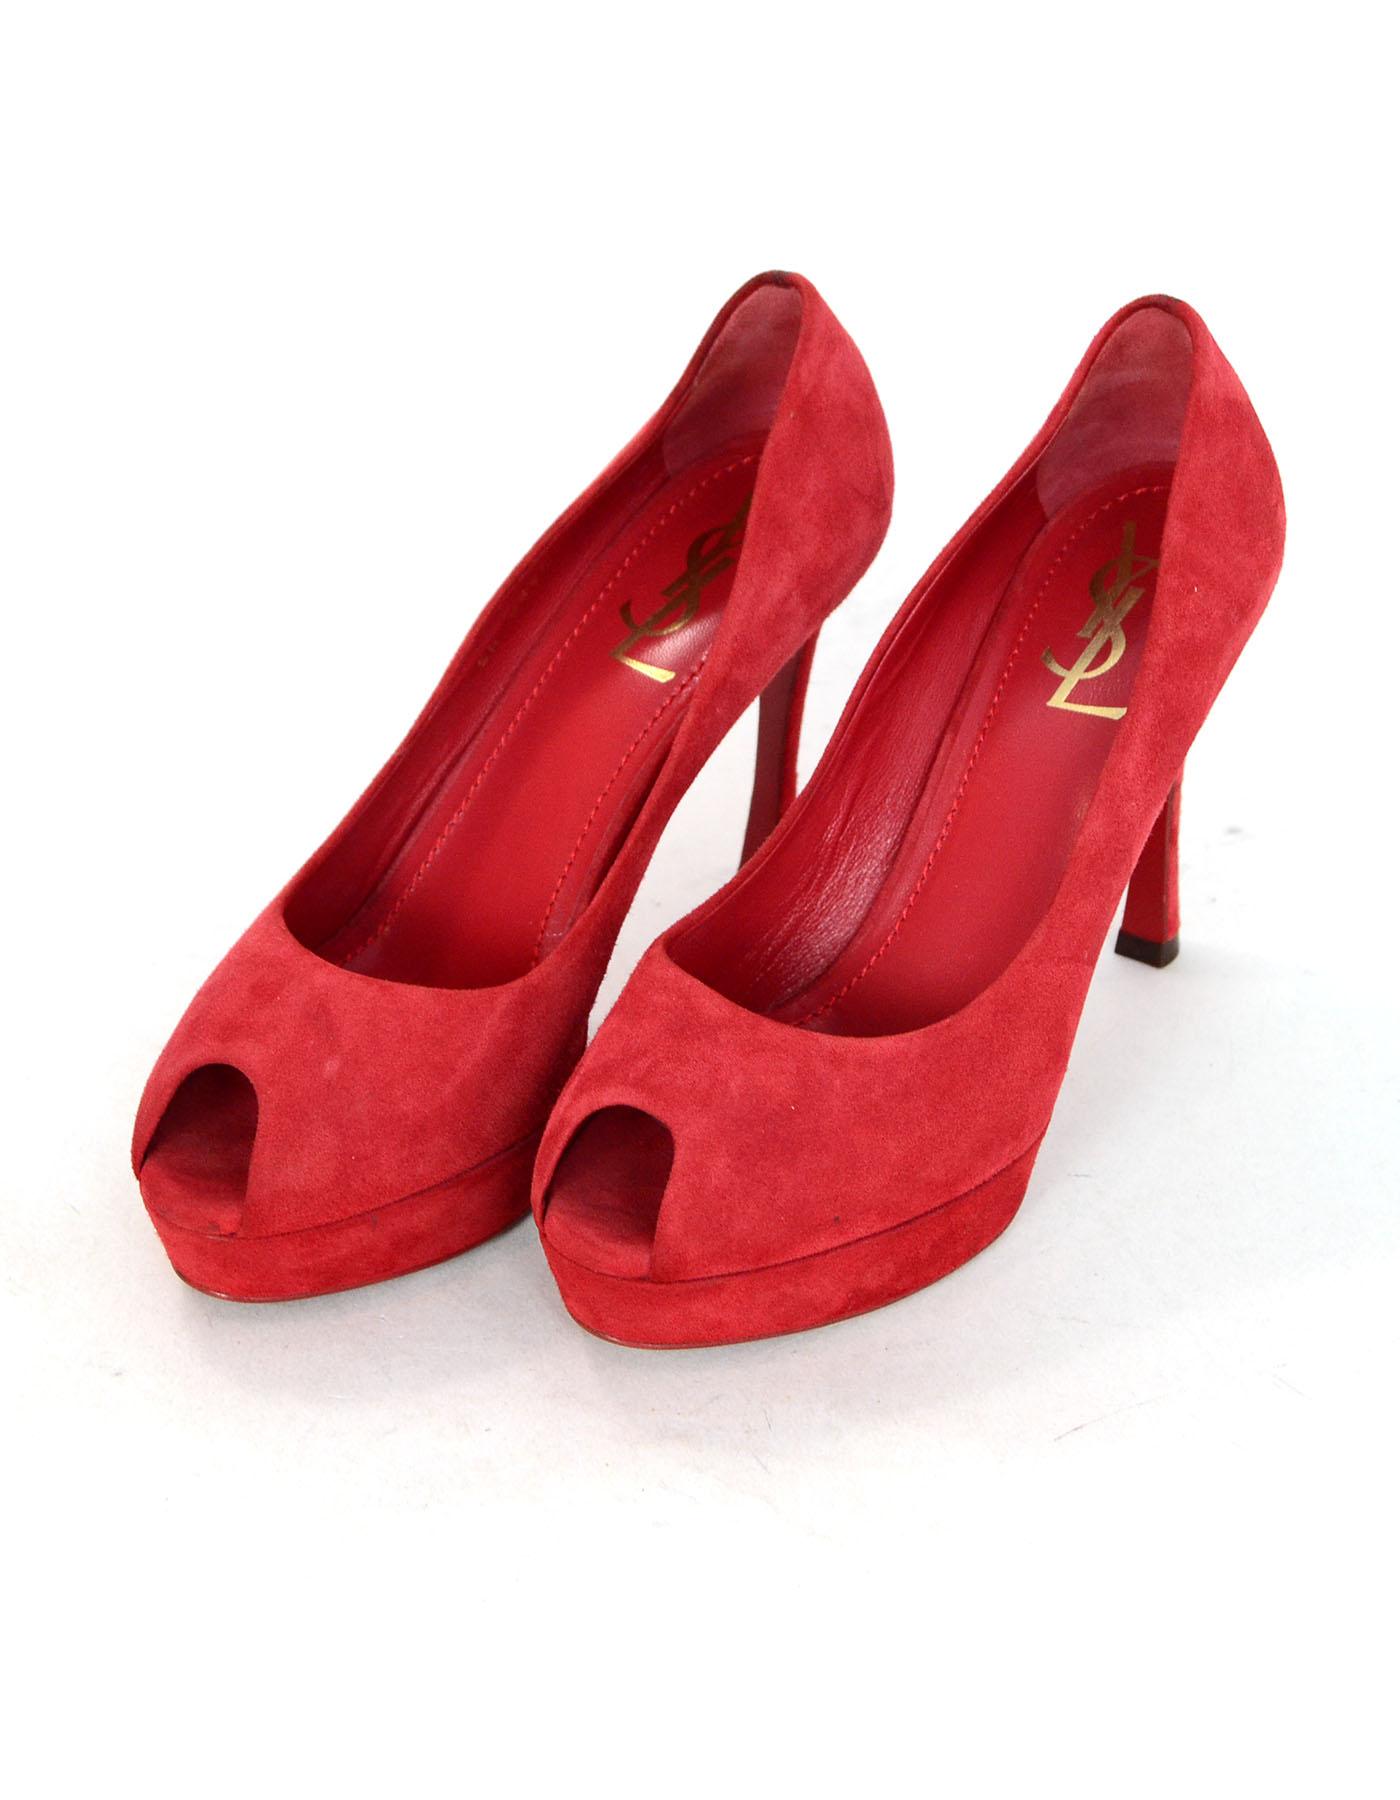 YSL Rust Suede Palais 80 Peep-Toe Pumps Sz 37.5 NEW

Made In: Italy
Color: Rust
Materials: Suede
Closure/Opening: Slide on
Sole Stamp: Yves Saint Laurent Made in Italy 37.5
Retail Price: $720 + tax
Overall Condition: Excellent pre-owned condition -